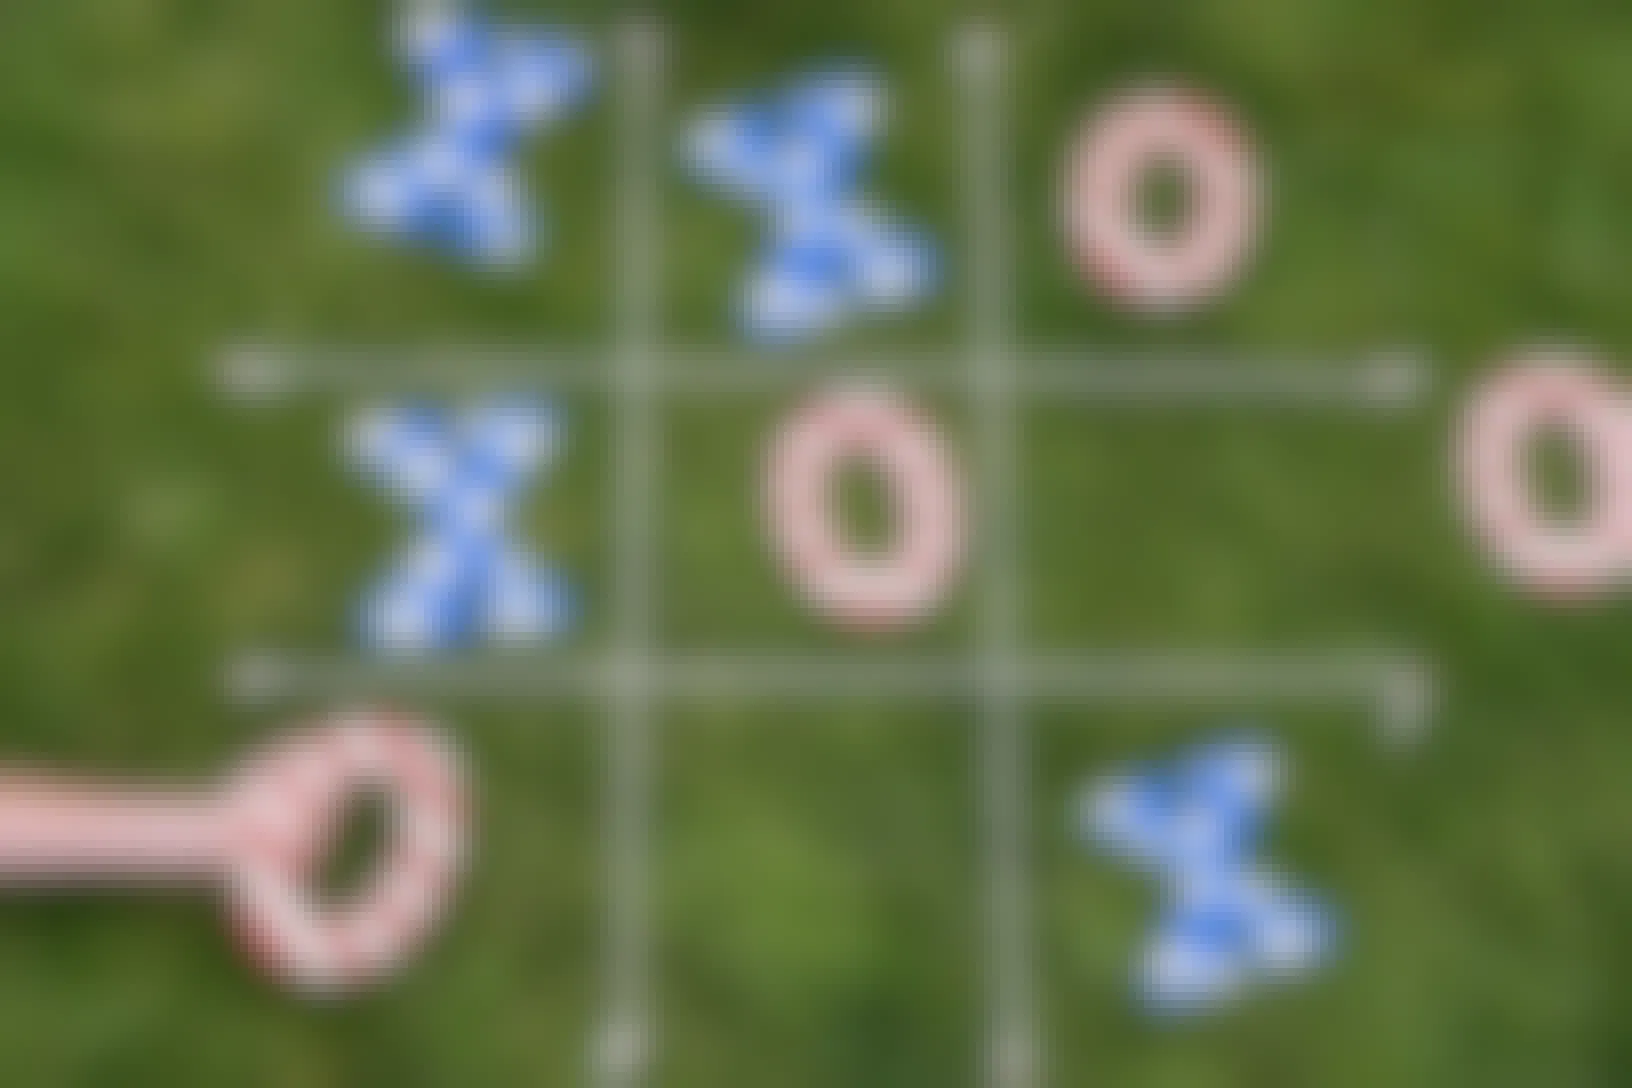 A person placing a red-and-white-striped O in a space below a blue X with white stars on a lawn tic-tac-toe game.